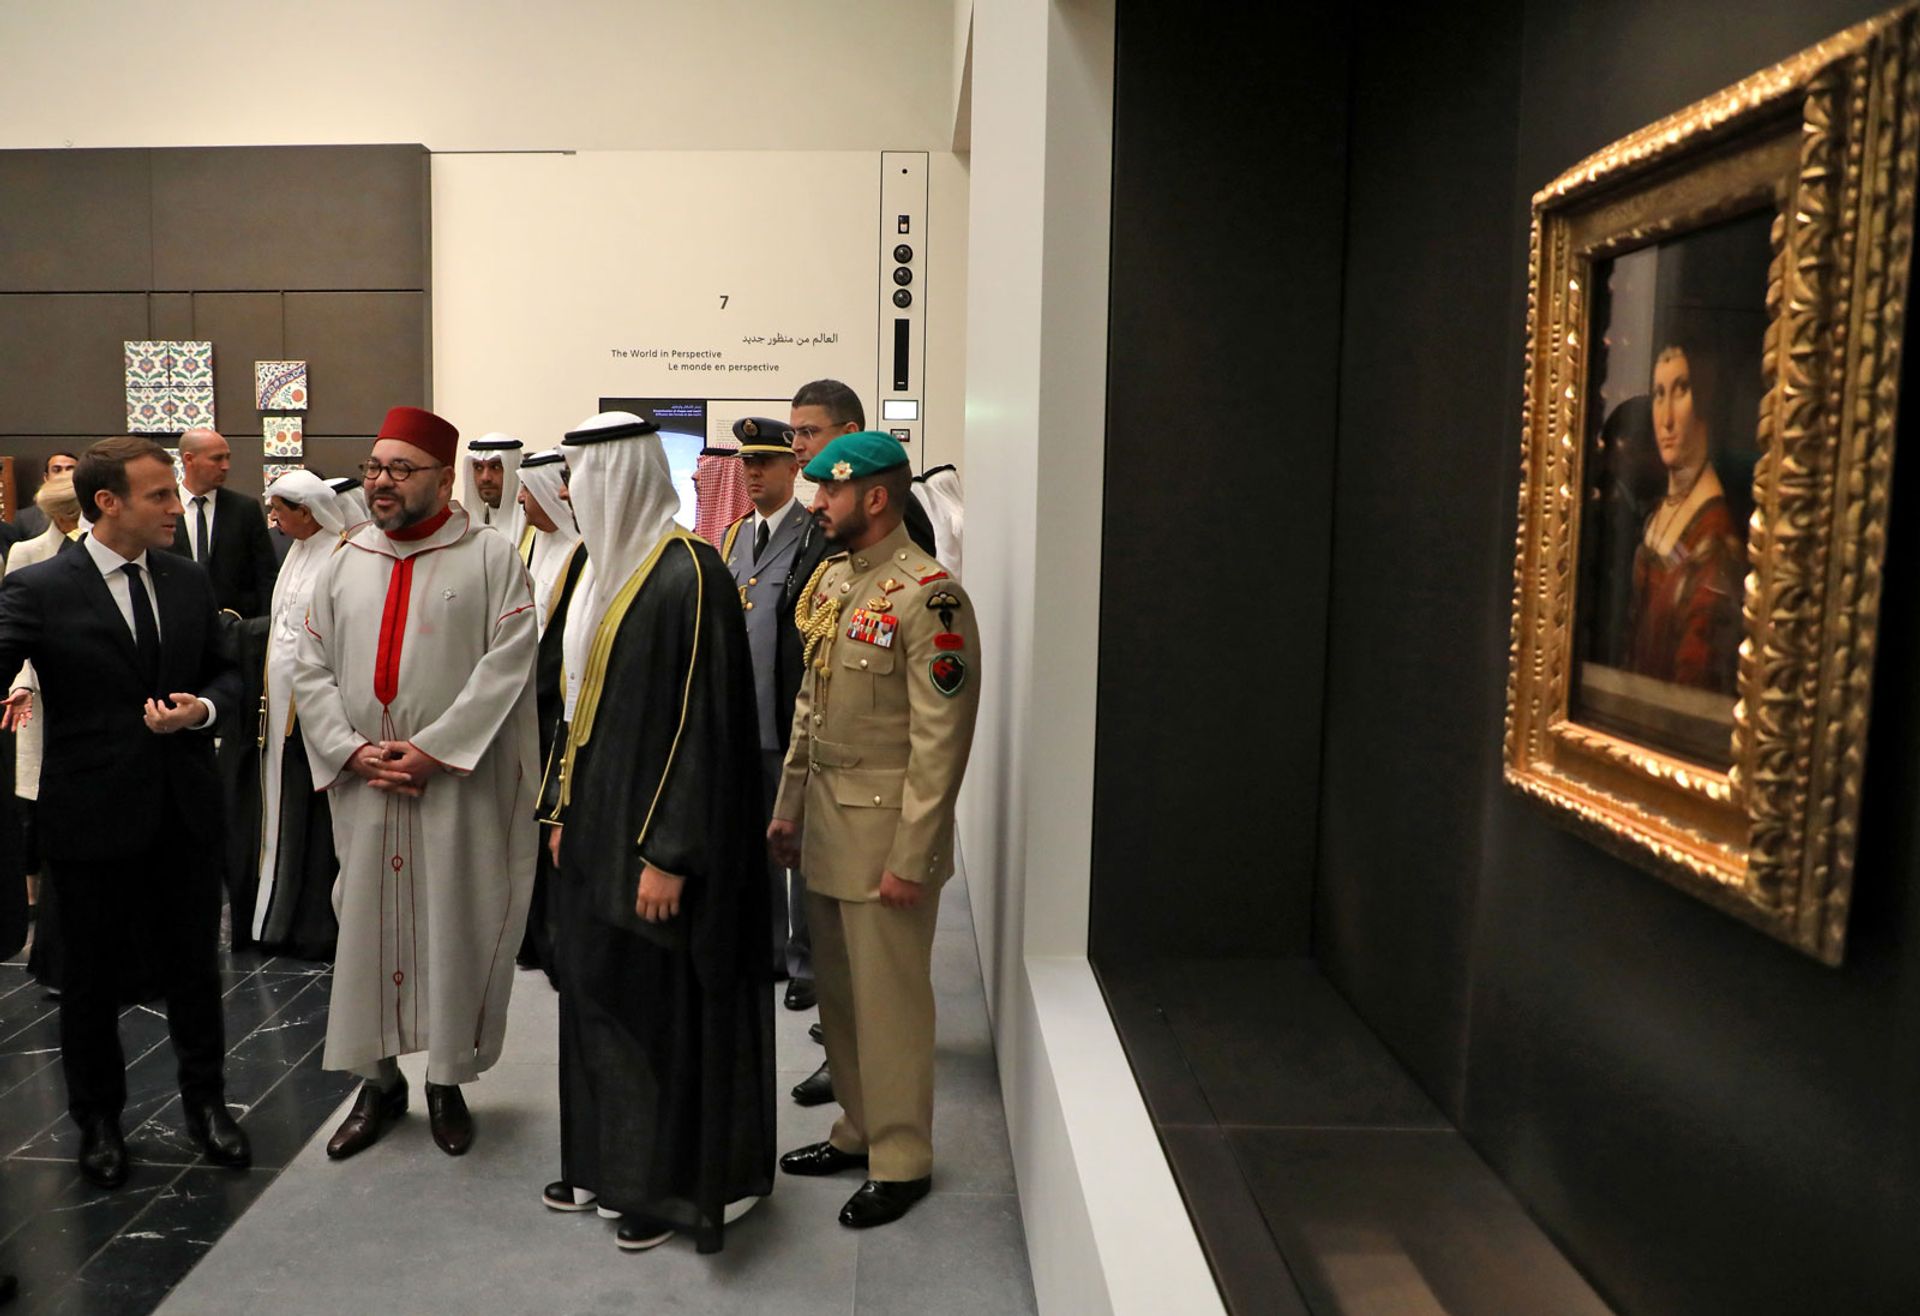 Leonardo's Salvator Mundi is due to go on show at Louvre Abu Dhabi alongside the artist's La Belle Ferronnière (around 1490), seen here with French President Emmanuel Macron and Moroccan King Mohammed VI REUTERS/Ludovic Marin/Pool